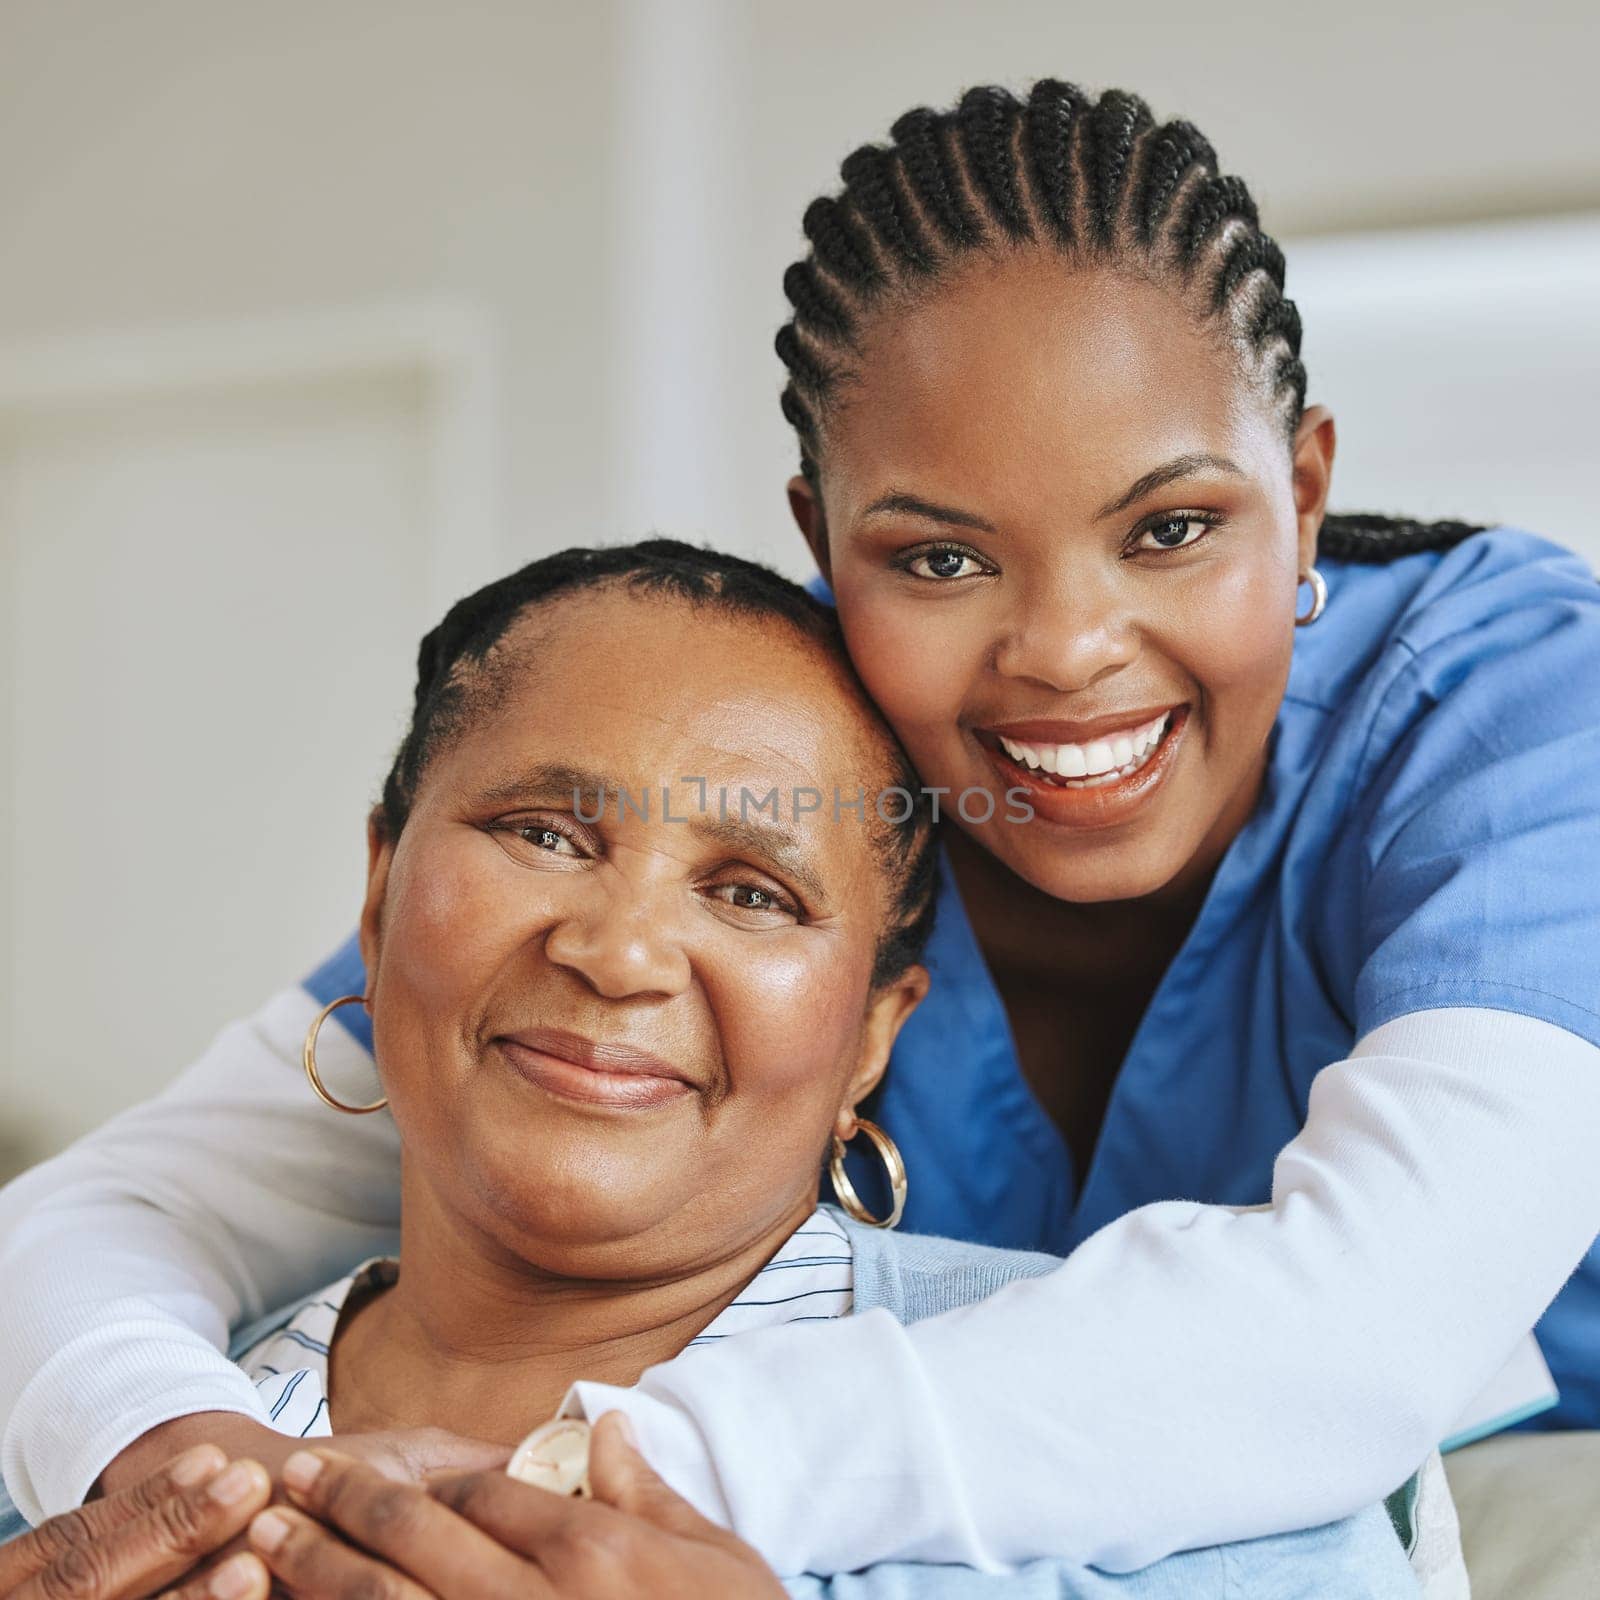 Senior patient, nurse woman and hug portrait for support, healthcare and happiness at retirement home. Face of black person and caregiver together for elderly care and help for health and wellness by YuriArcurs